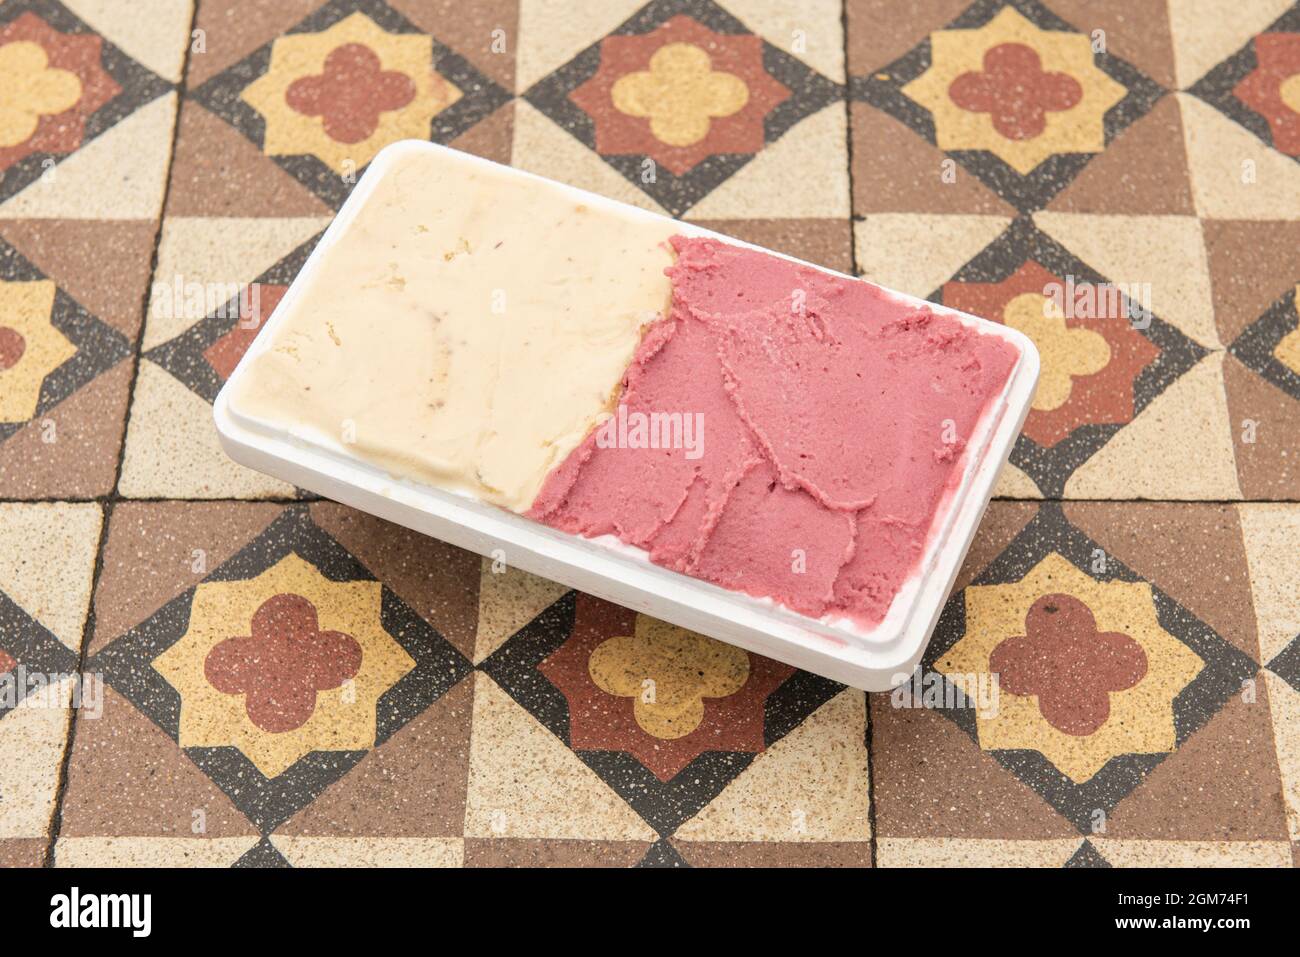 Half-liter tub of ice cream with two flavors in a home delivery container on hydraulic tiles Stock Photo